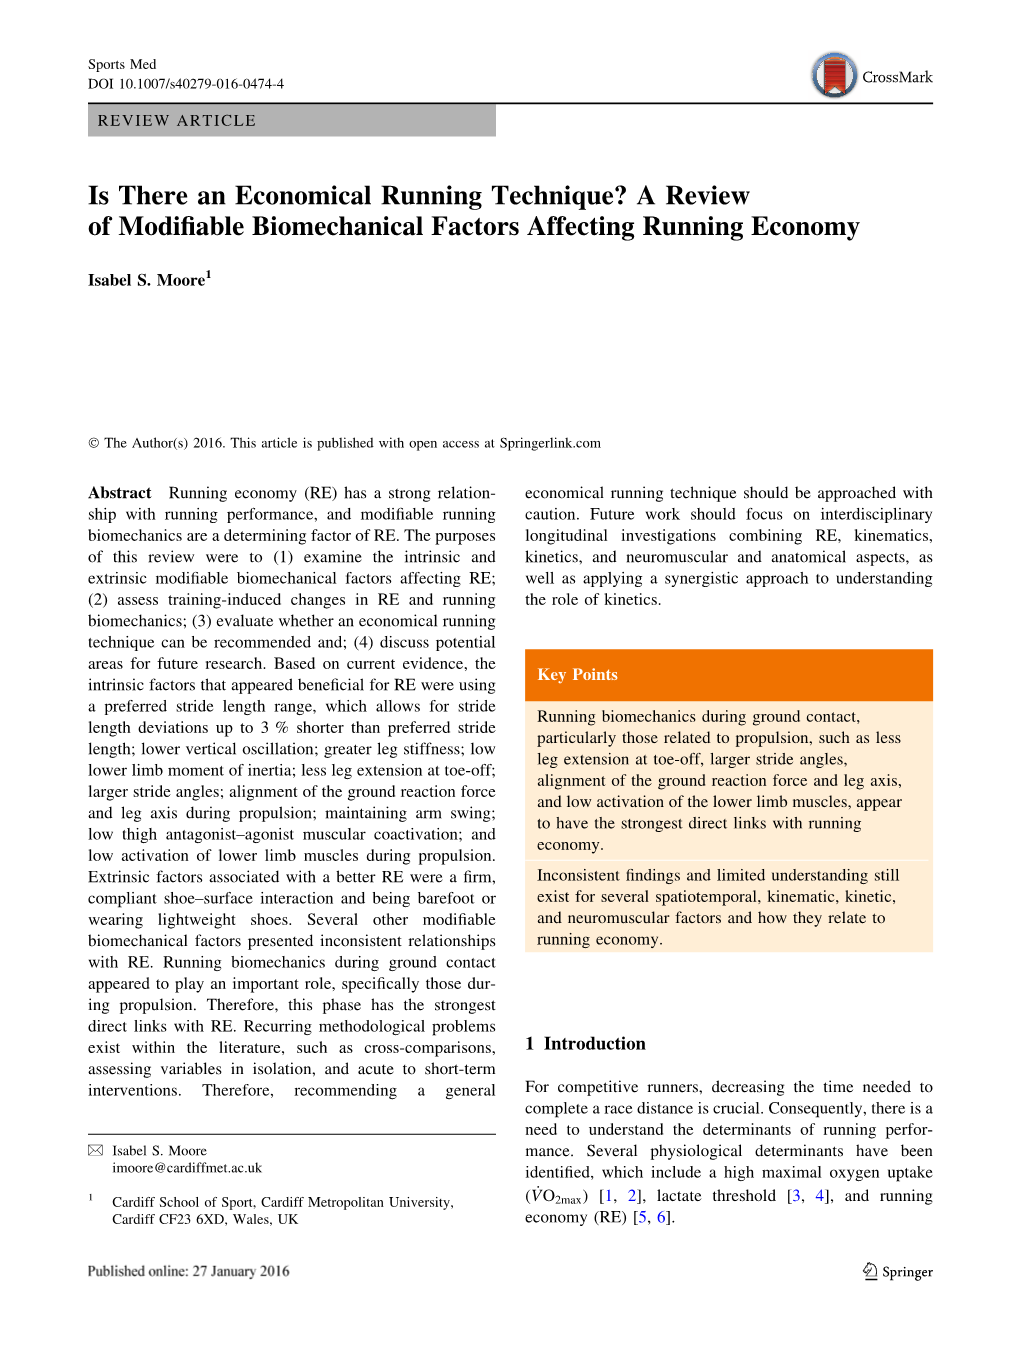 A Review of Modifiable Biomechanical Factors Affecting Running Economy